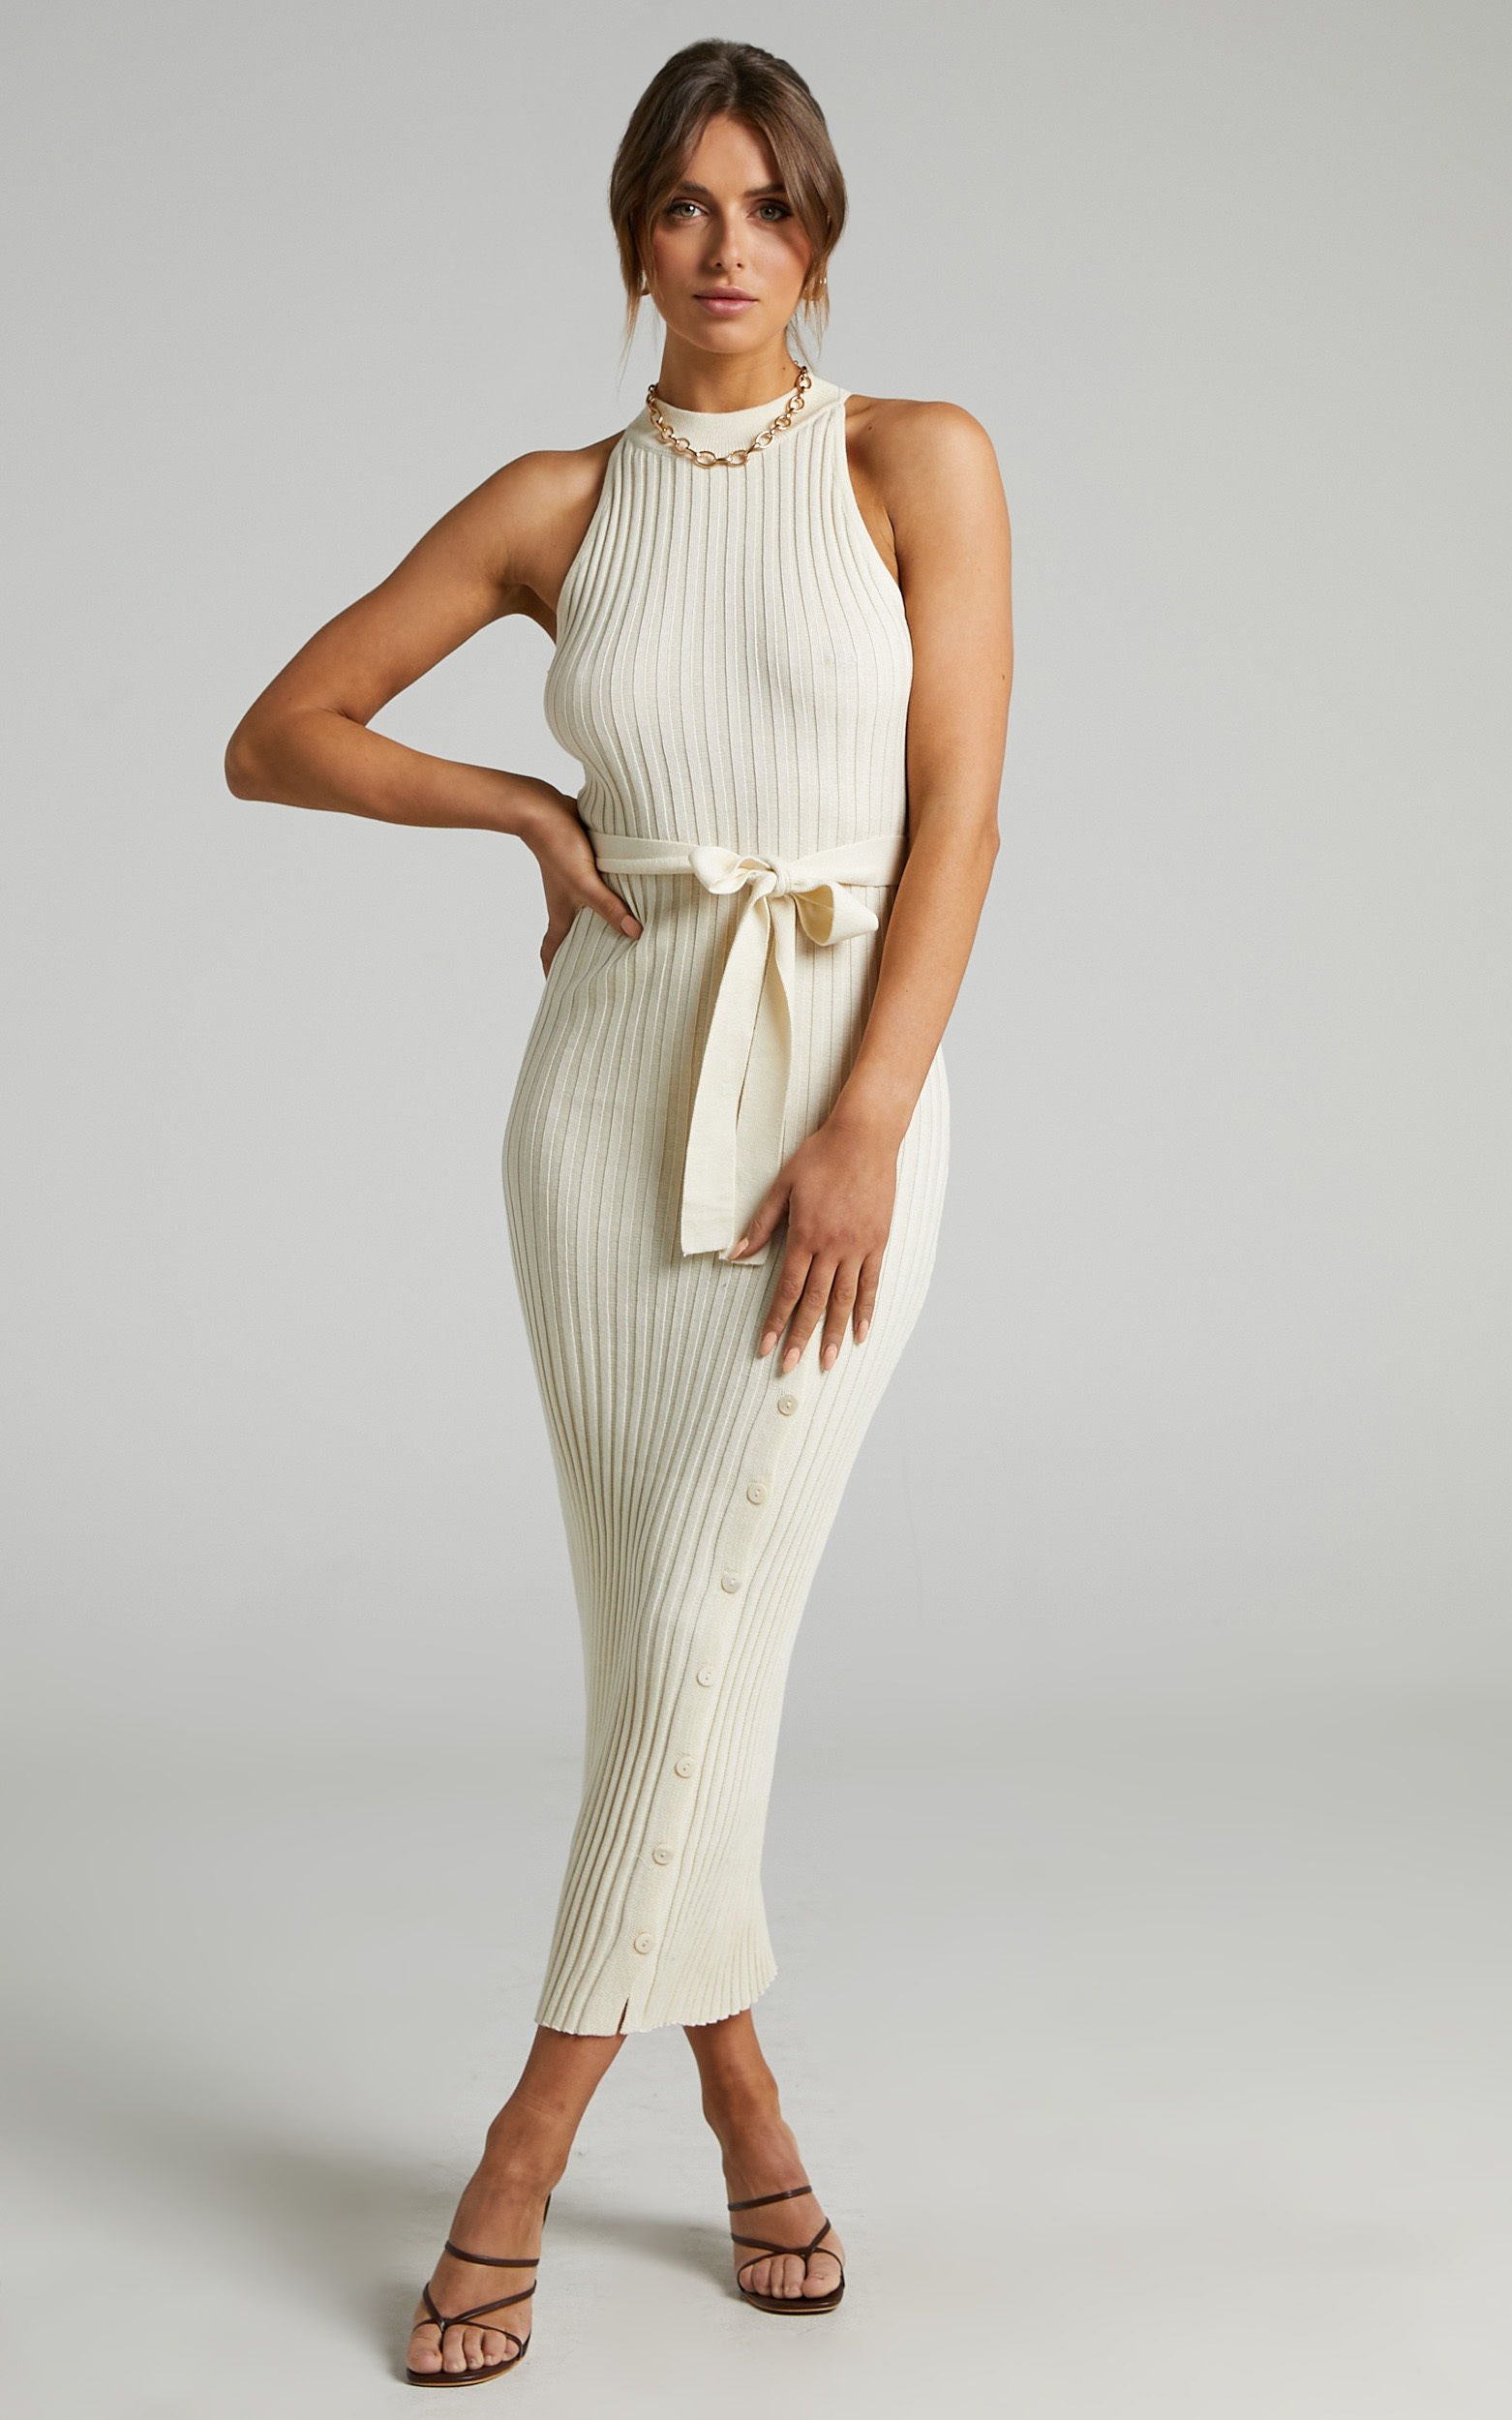 Verona High Neck Maxi Knit Dress with Button Up Split in Cream - 06, CRE2, hi-res image number null